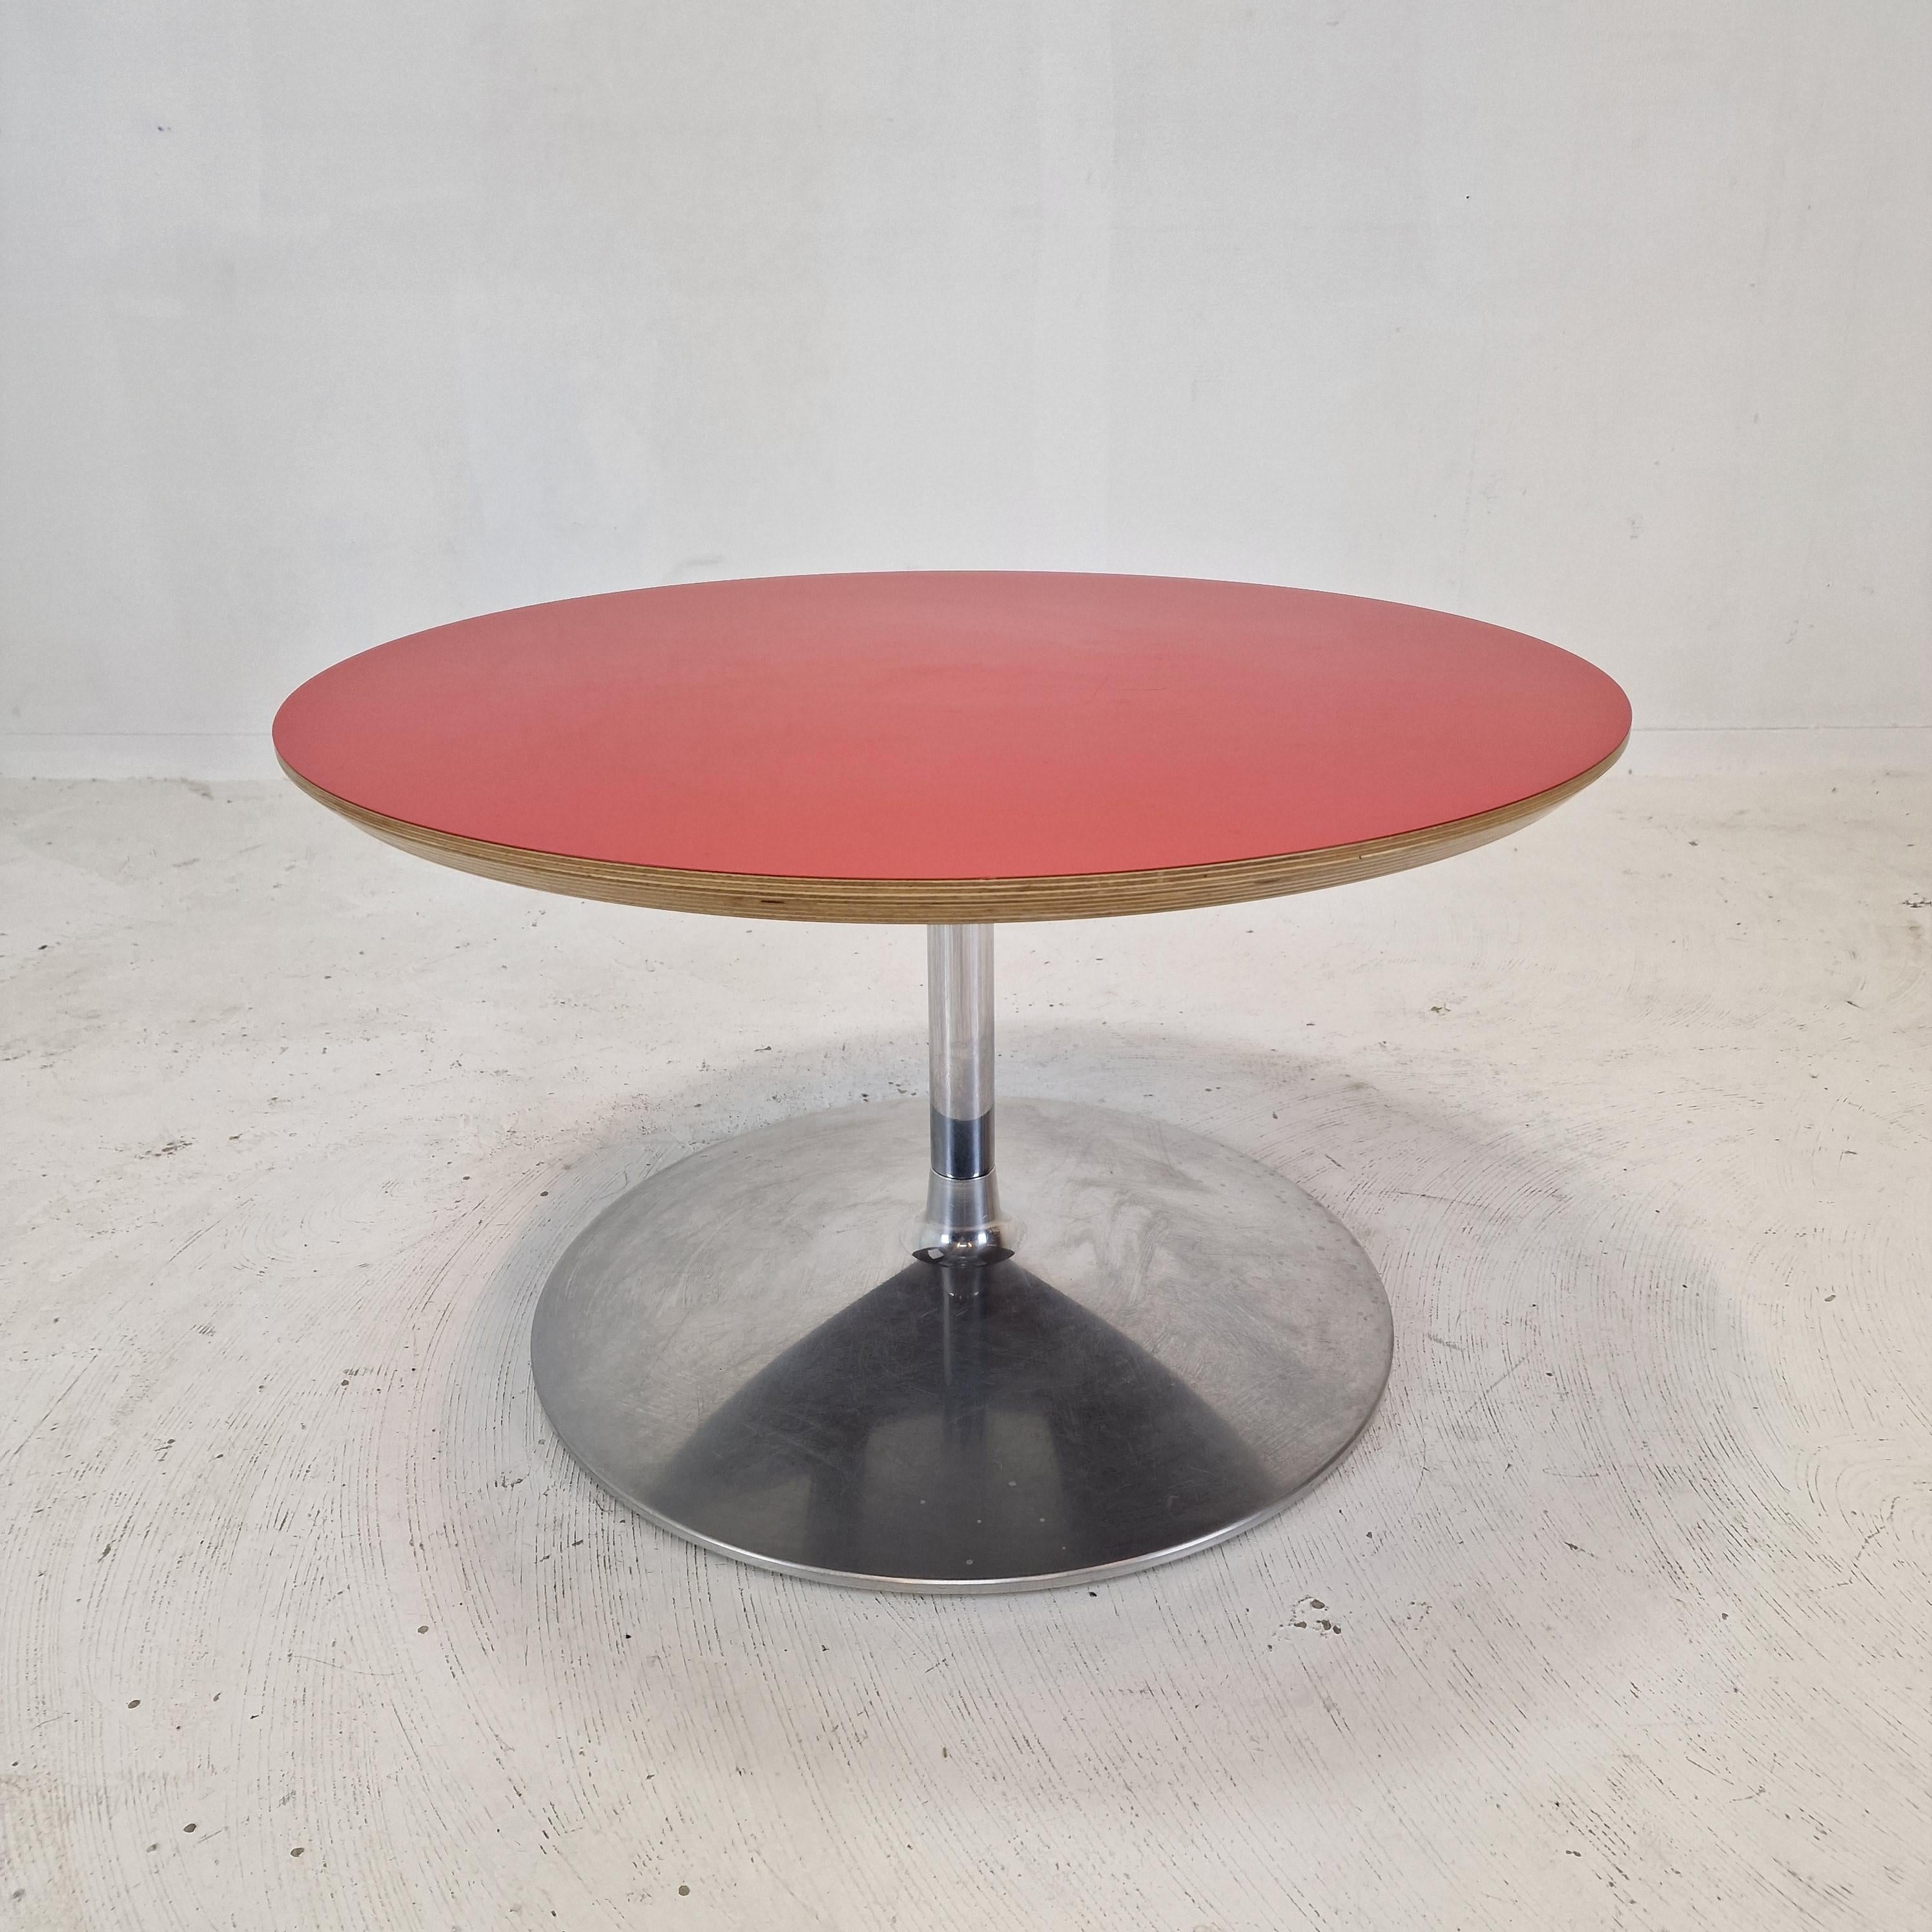 Very nice round coffee table, designed by Pierre Paulin in the 1960s. 

The name of the table is 